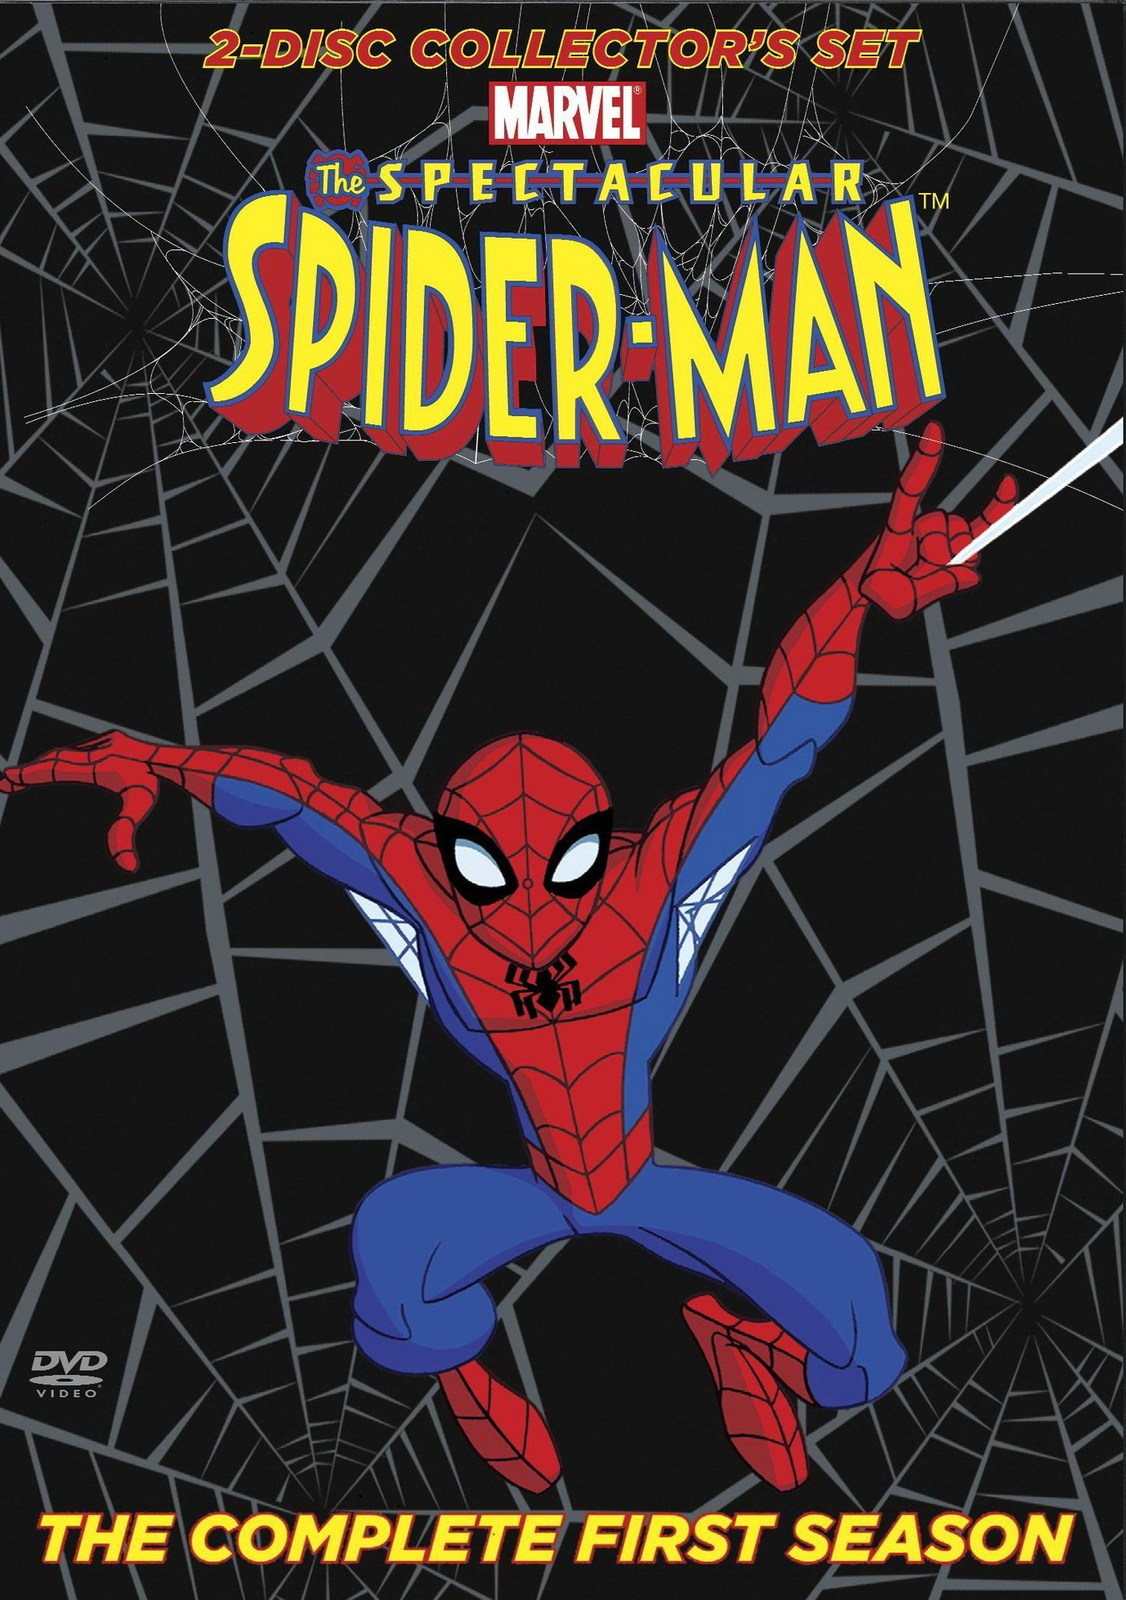 The Spectacular Spider-Man Poster 1976 Animated TV Series Art Print 24x36 27x40" - £8.71 GBP - £19.90 GBP